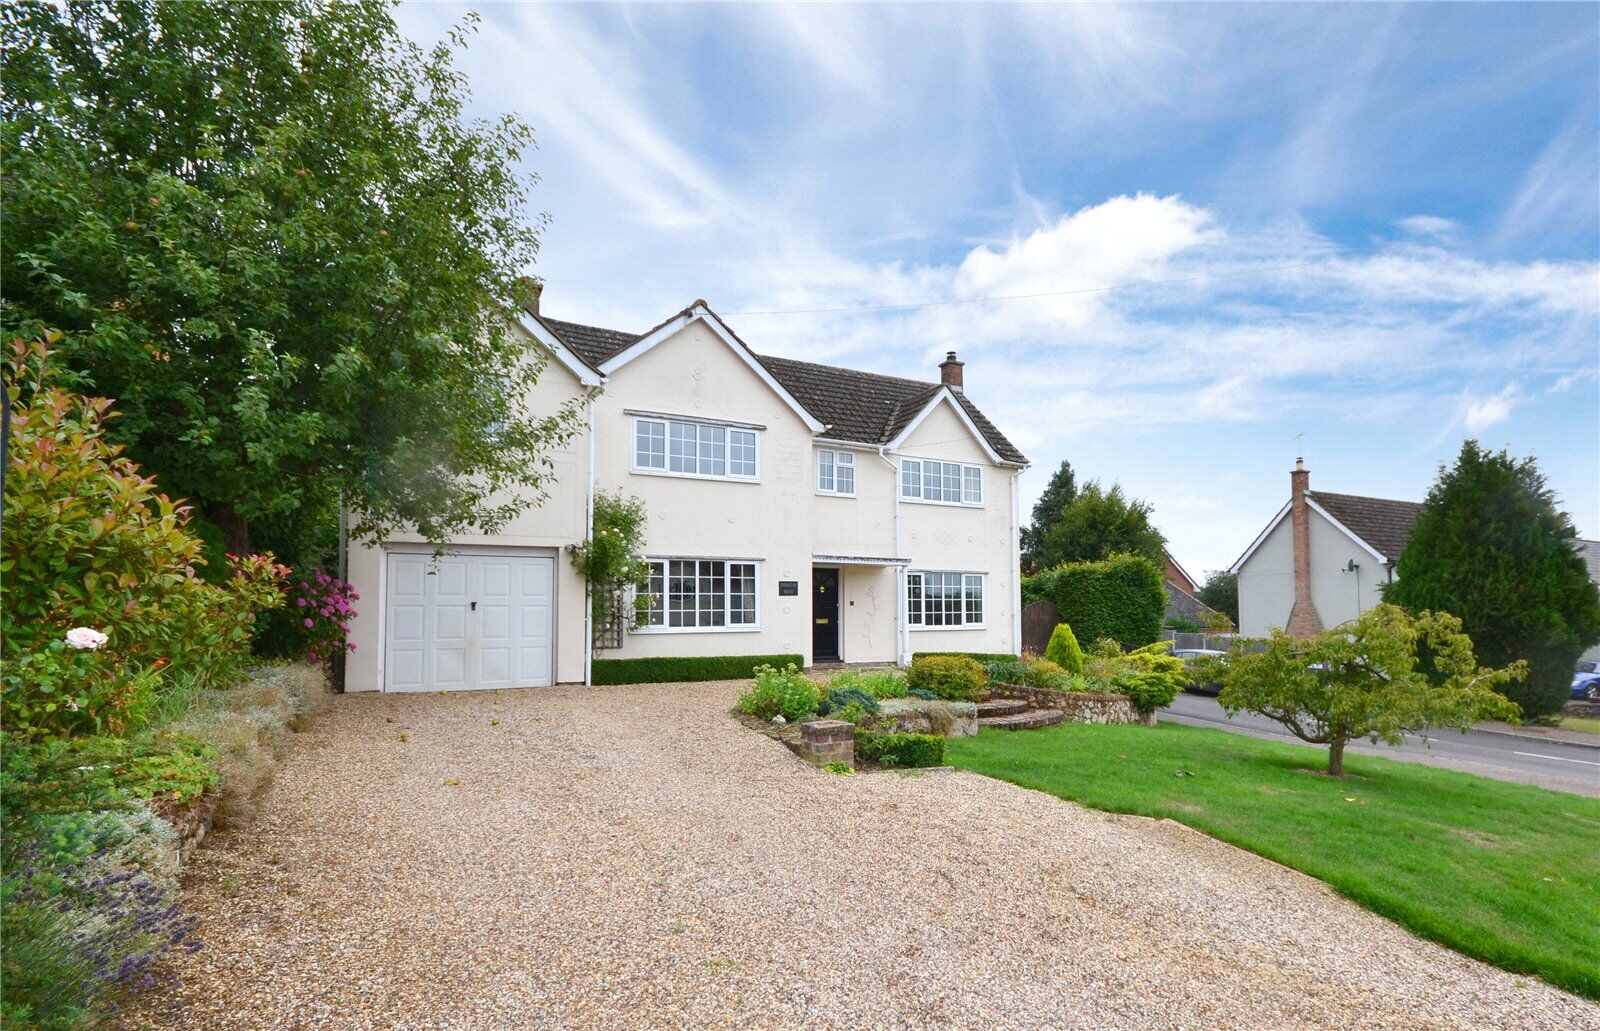 4 bedroom detached house for sale Thornton House, Great Easton, CM6, main image